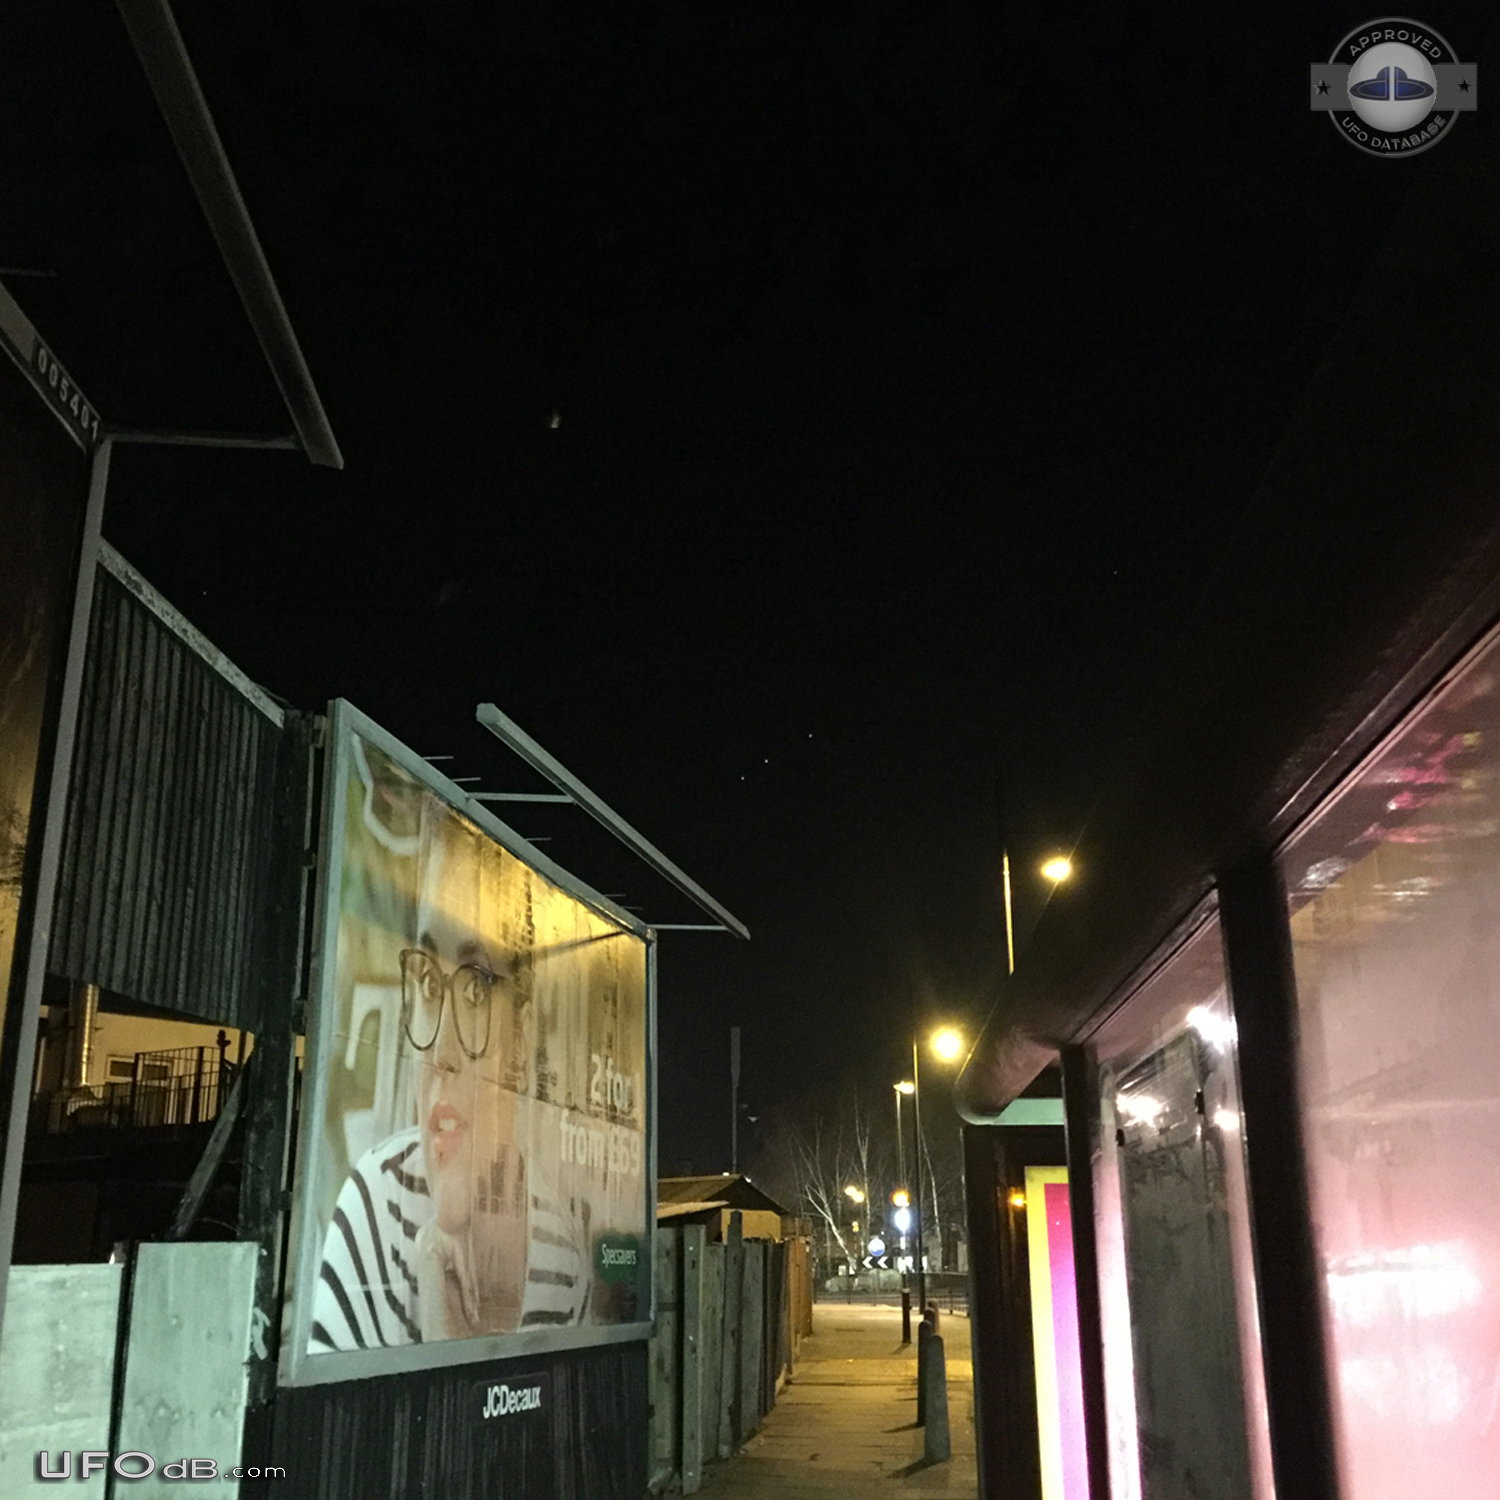 3 large orange red colored spheres UFOs Romford London England 2016 UFO Picture #793-2